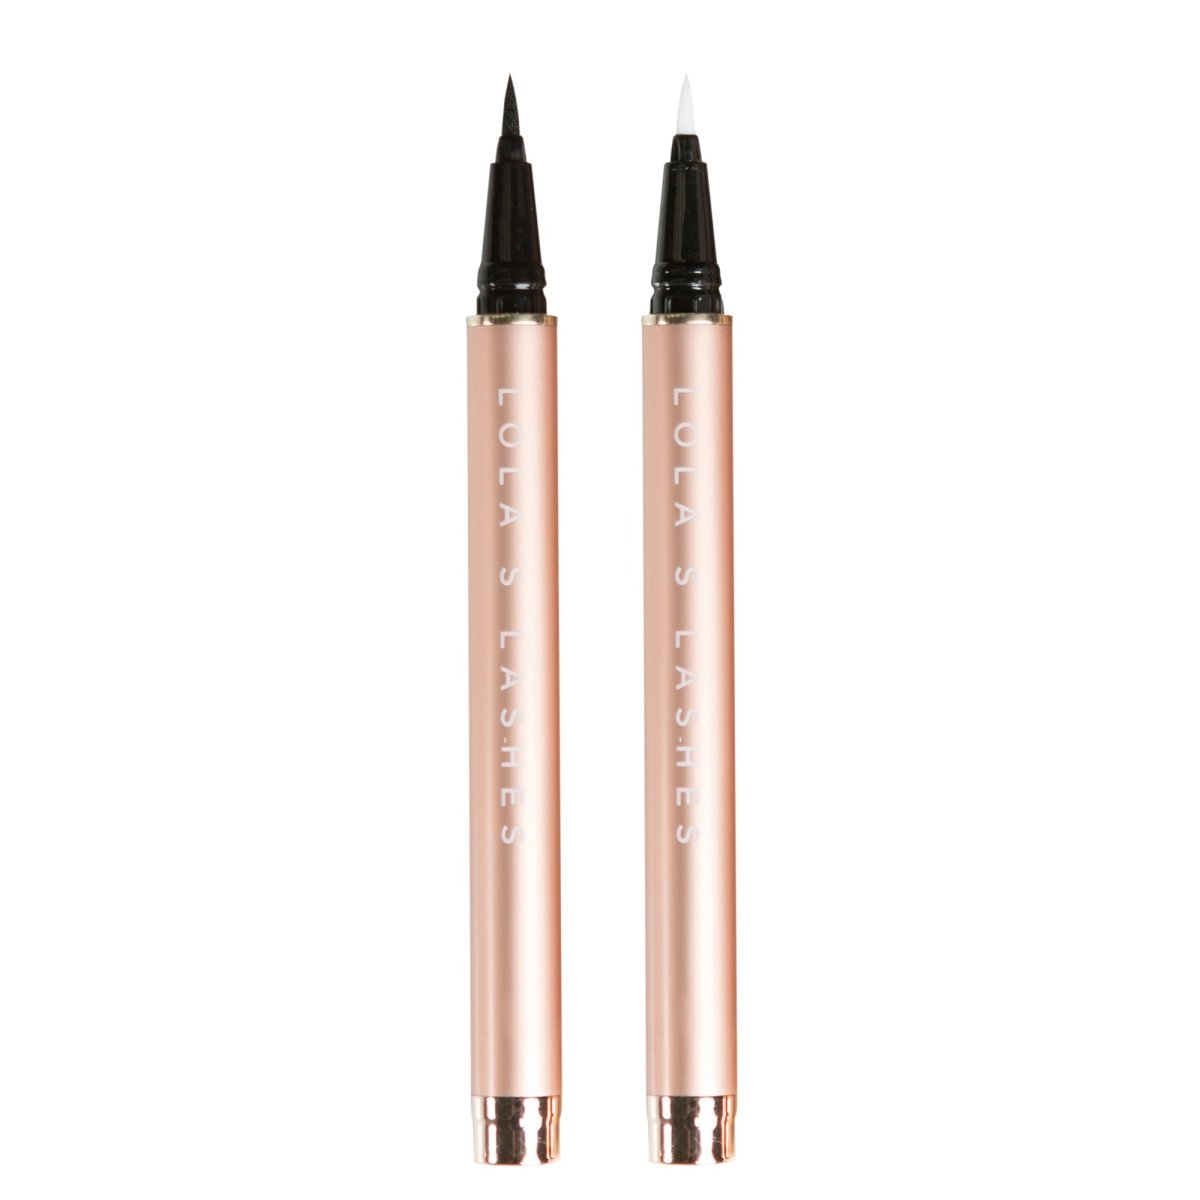 Flick and Stick Adhesive Eyeliner Precision Pen Duo - Lola's Lashes